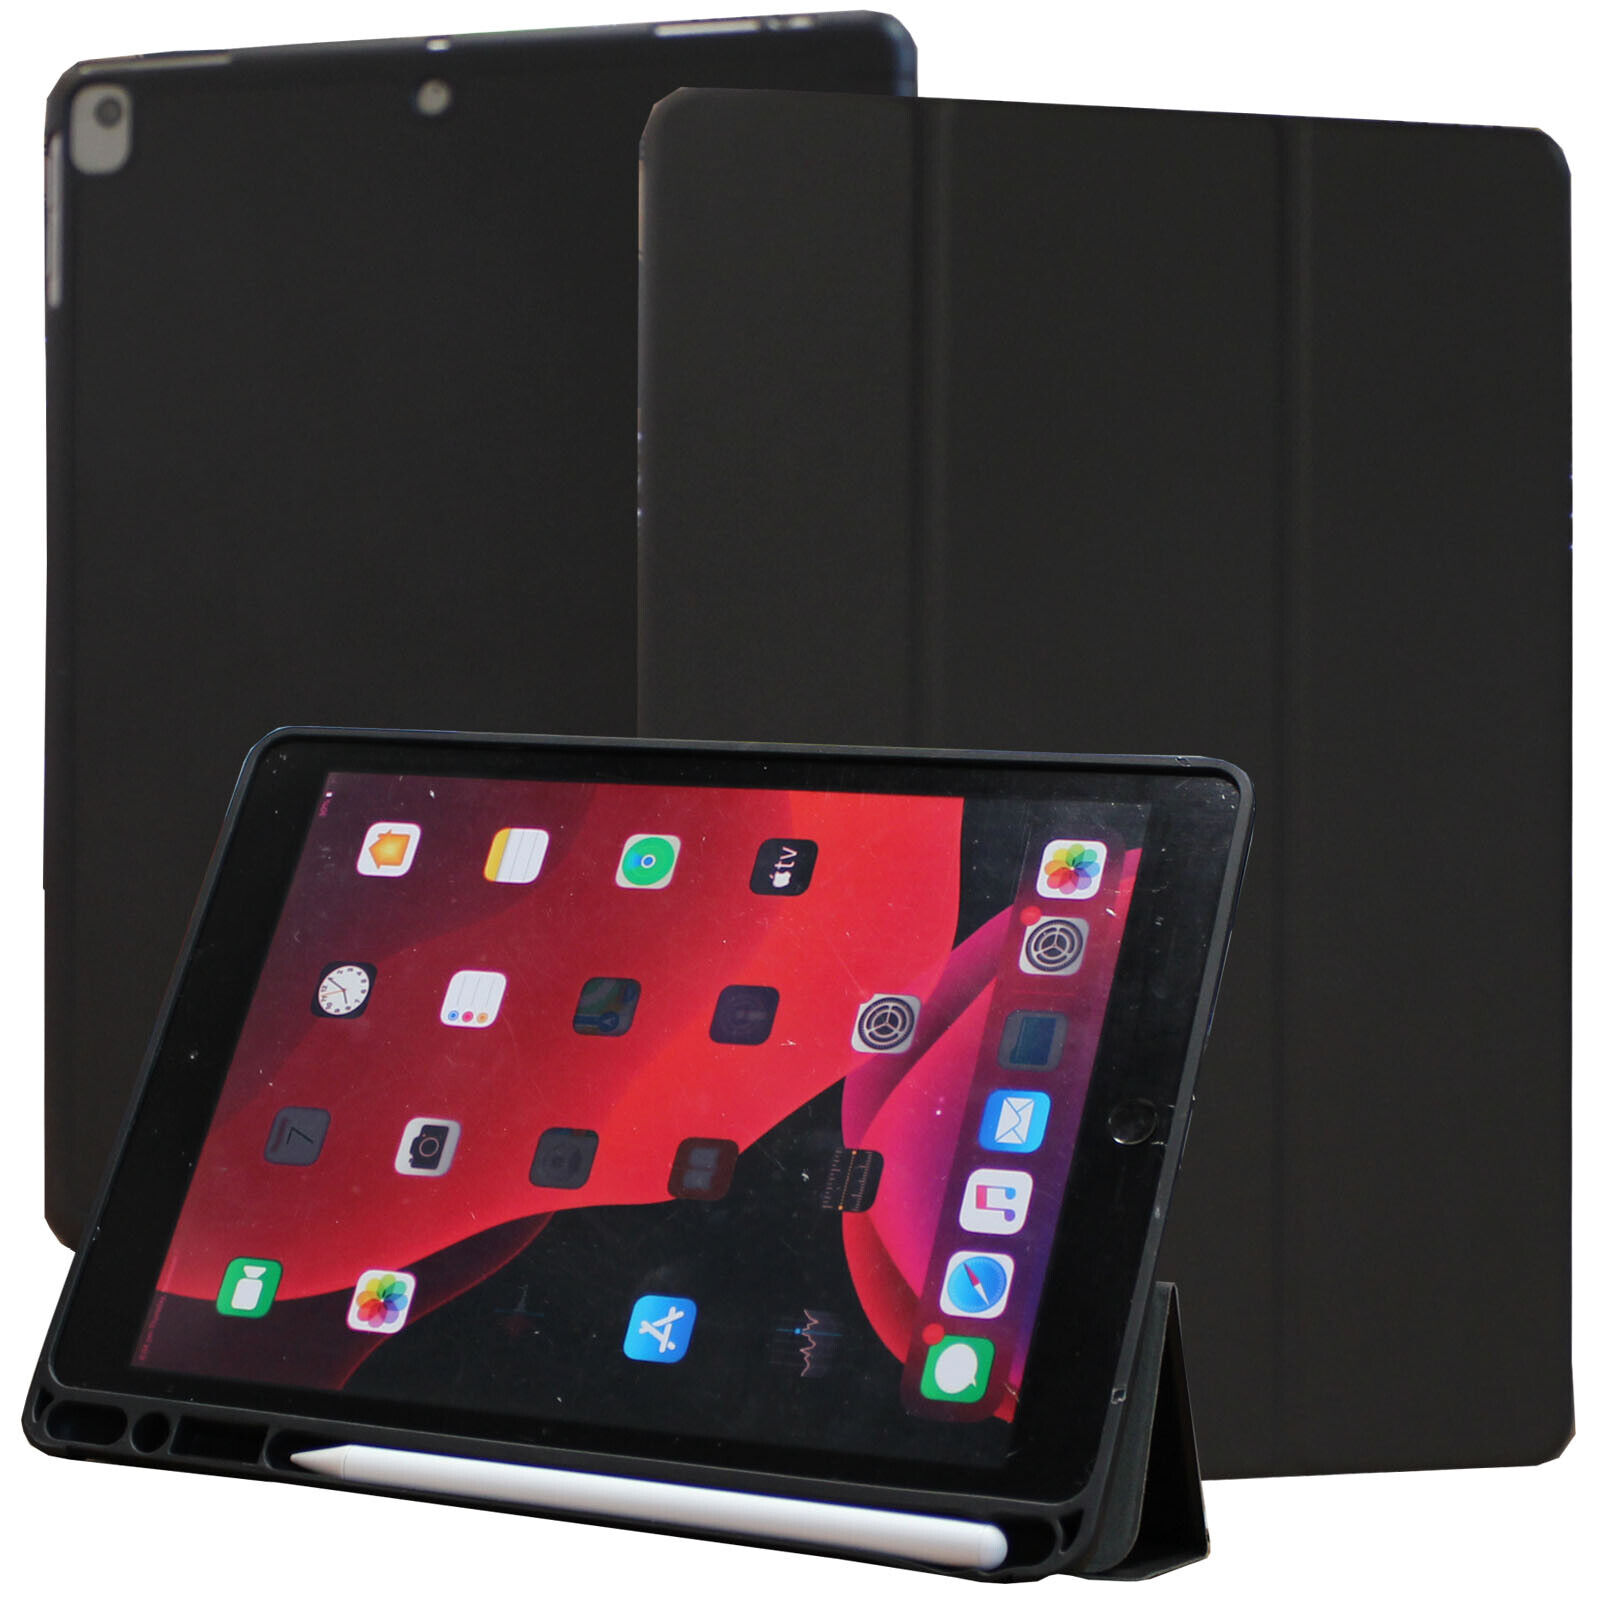 TPU Slim Magnetic Stand Smart Case Cover For iPad 7th 8th Generation 10.2 Inch